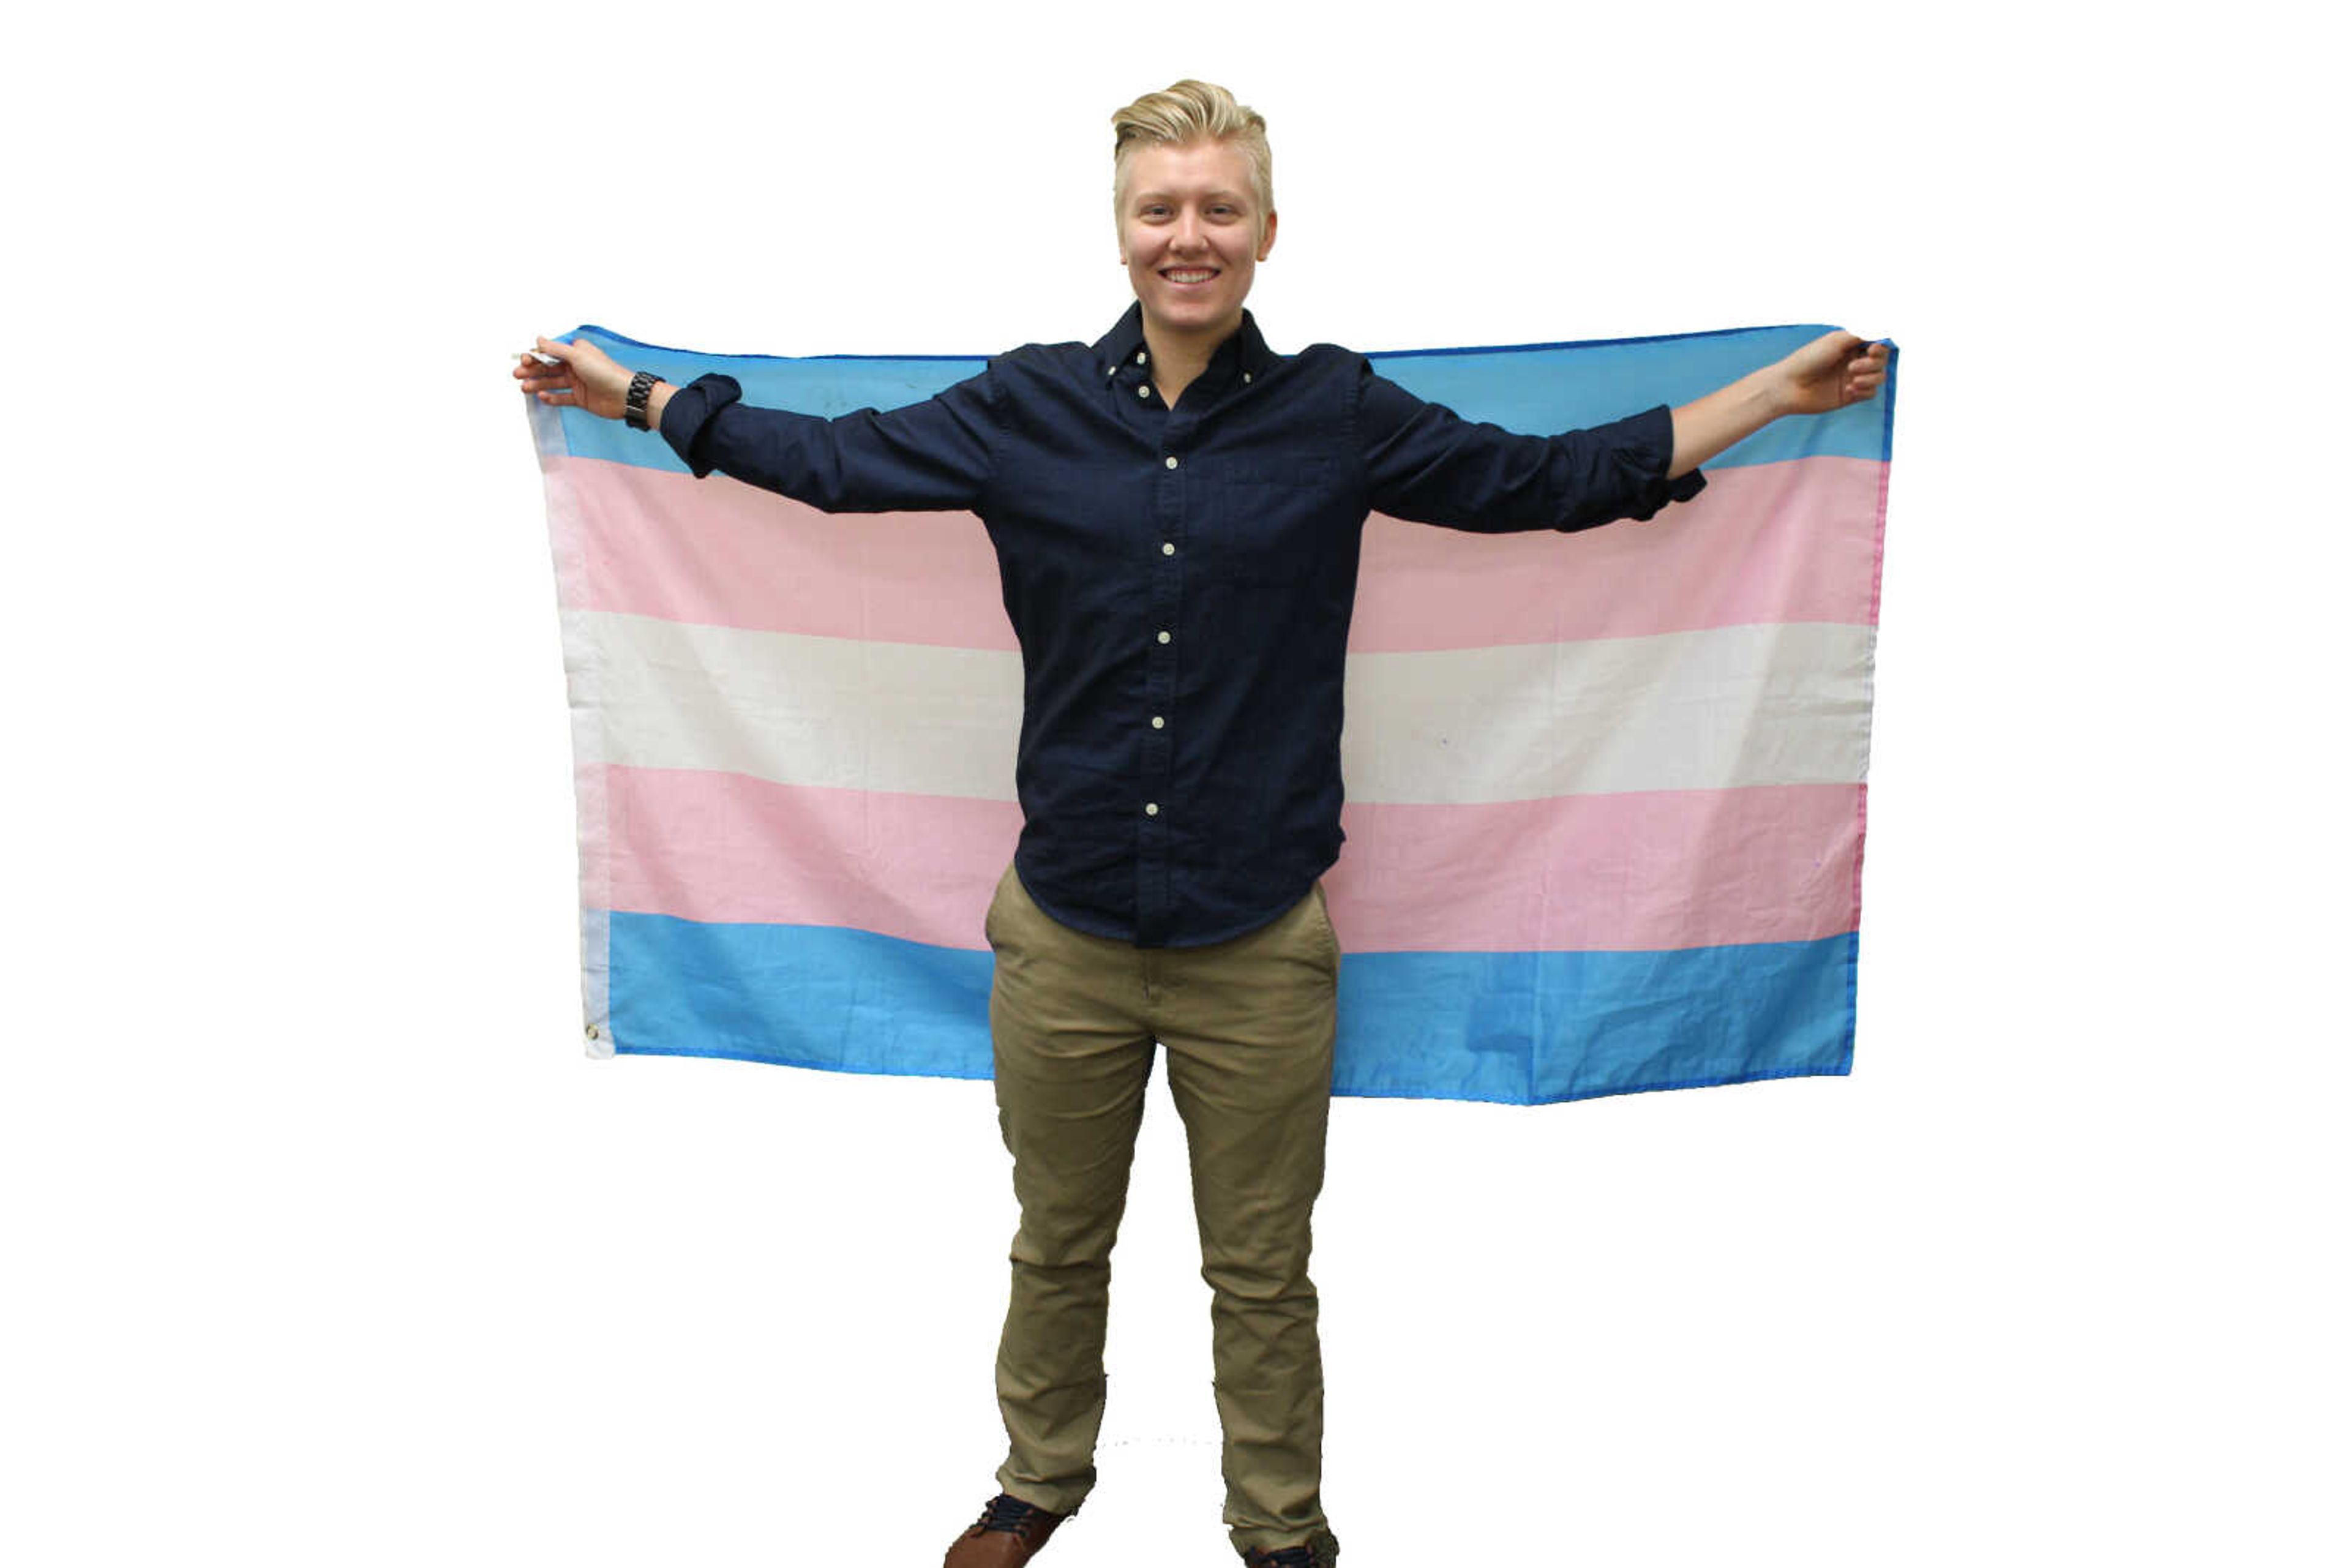 Rane Belling raises the transgender flag behind them in the Center for Student Involvement on March 19, 2018.